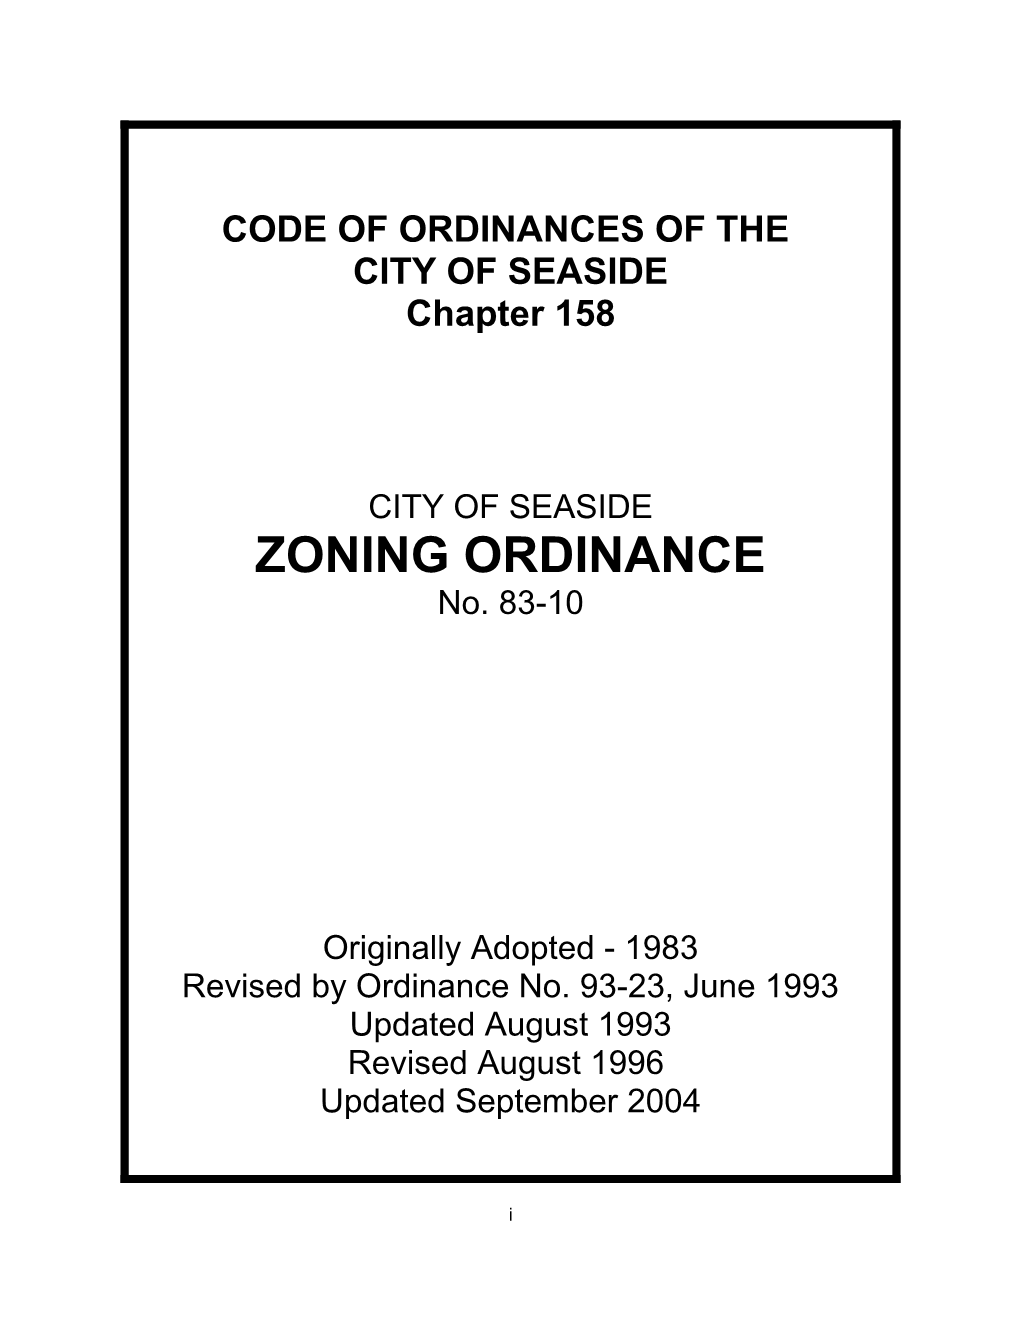 Code of Ordinances of The